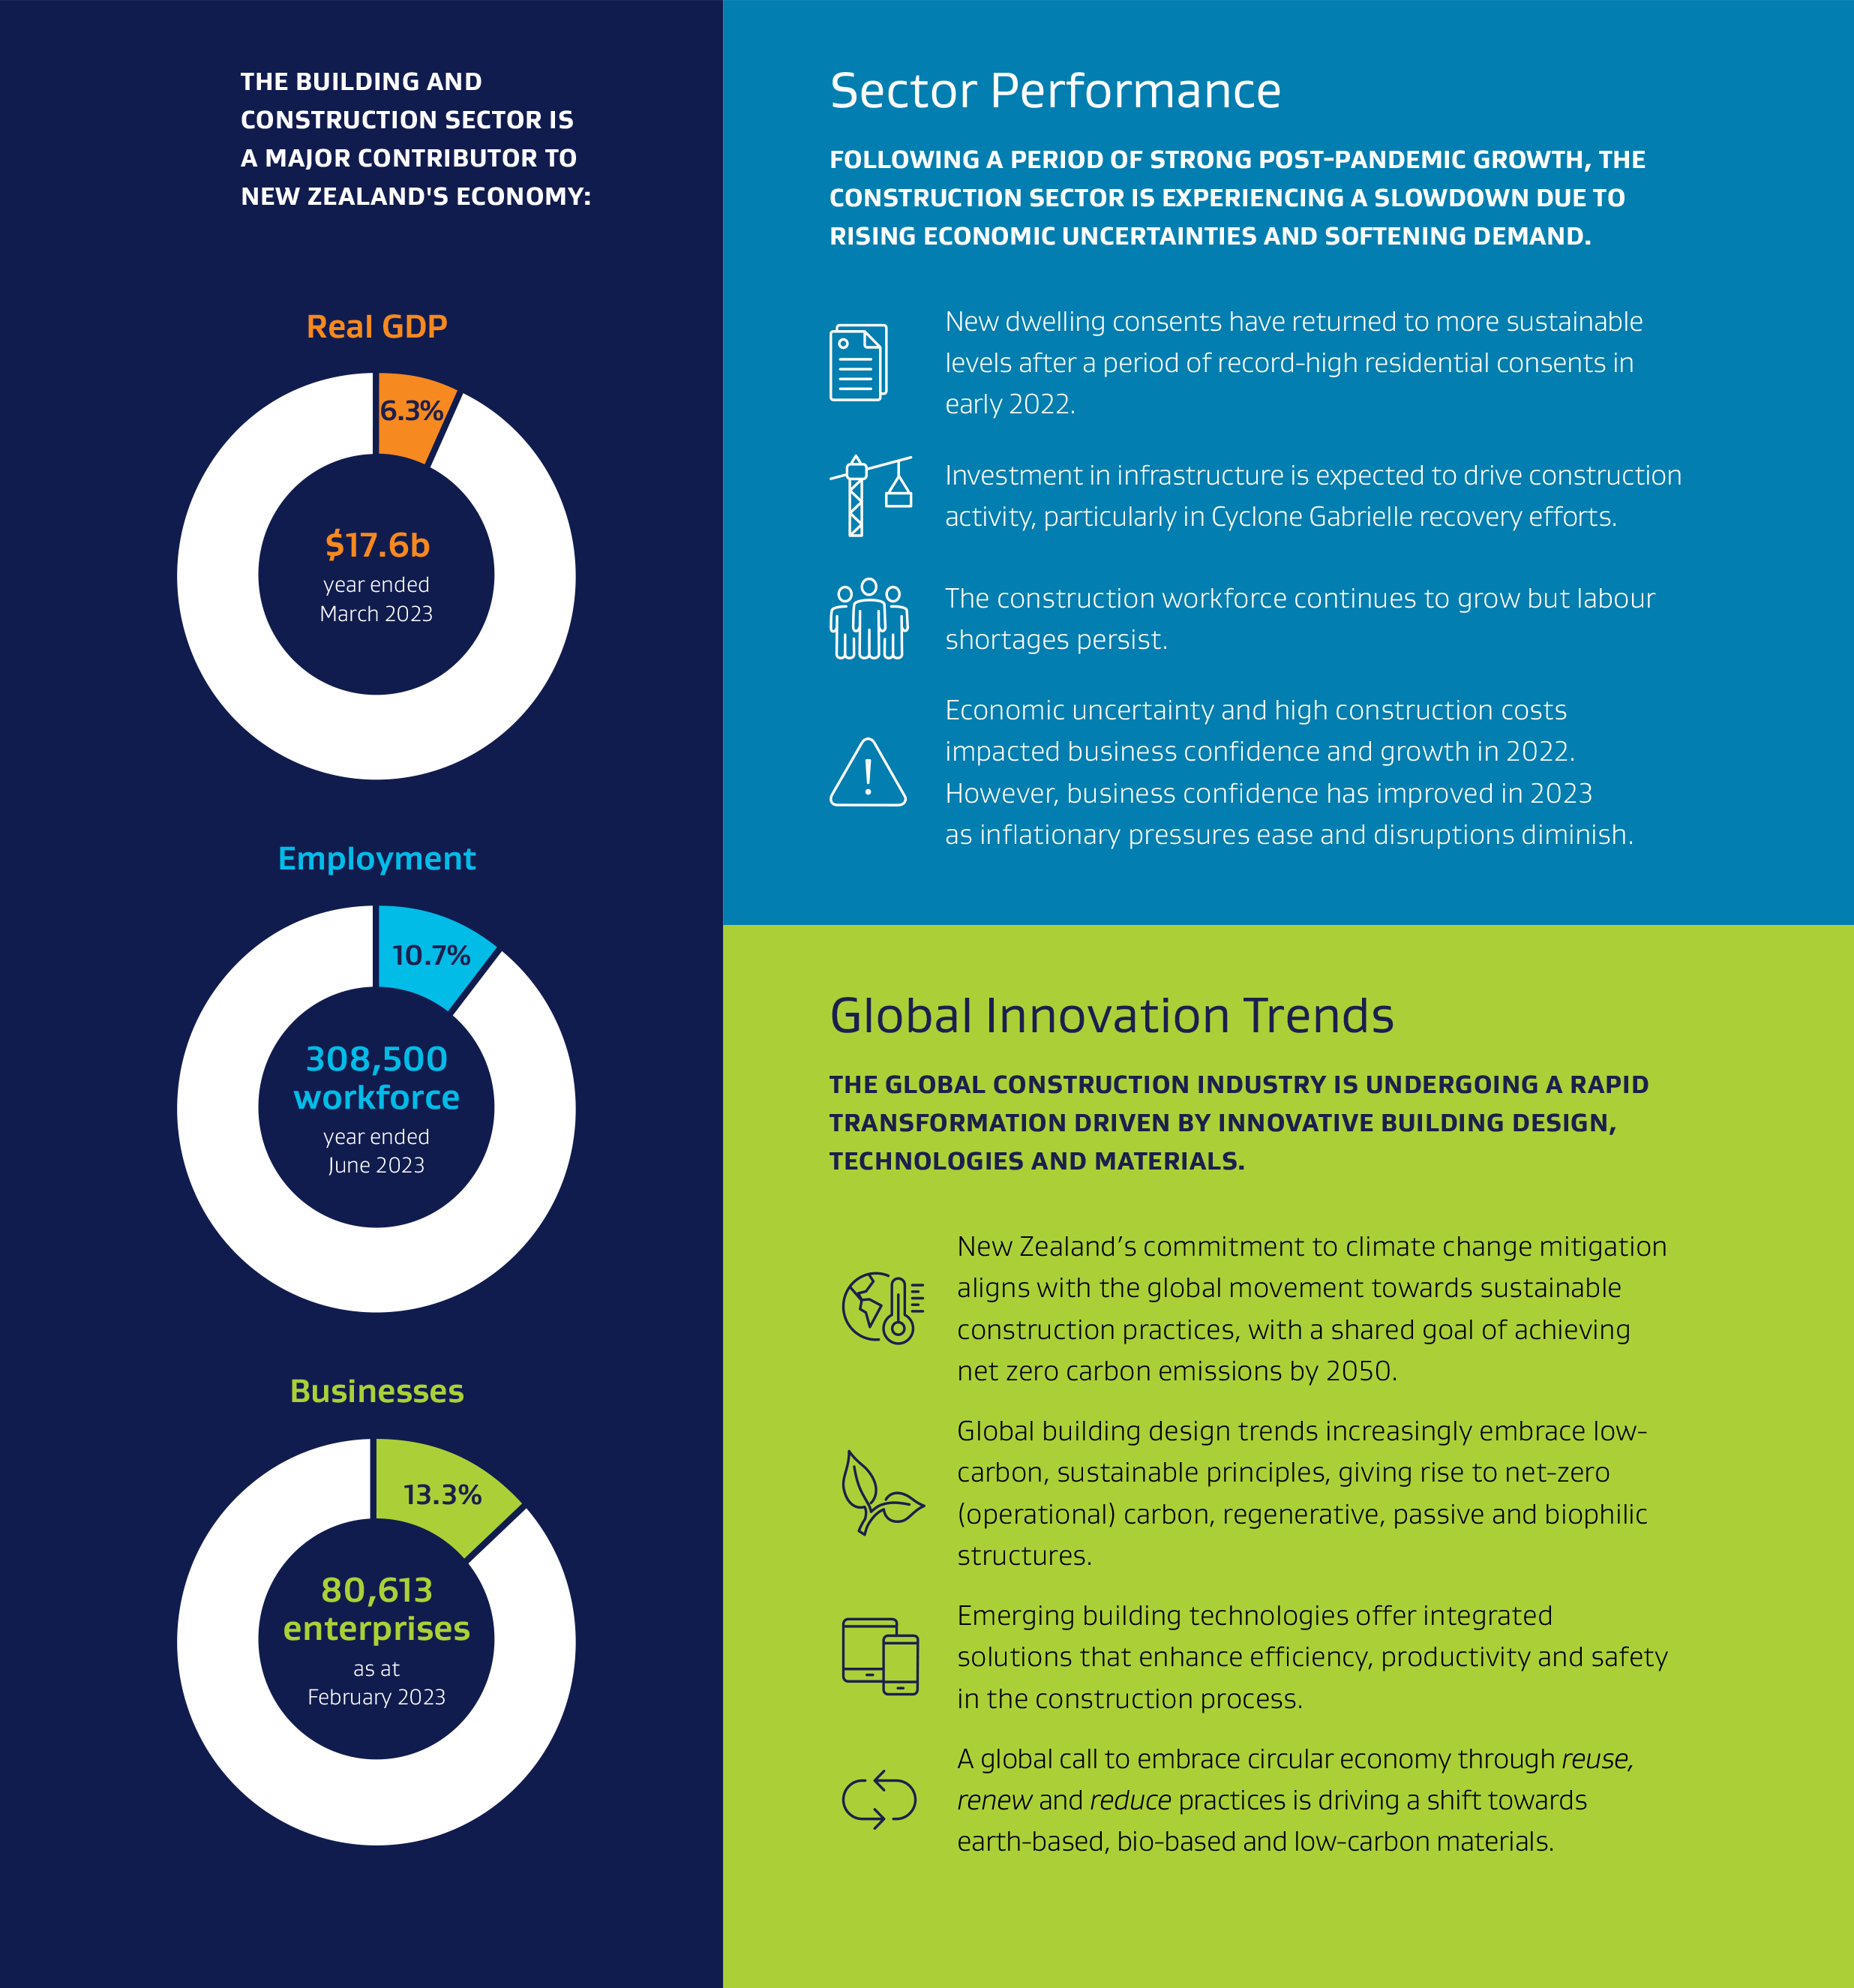 Infographic: key insights into the sector’s performance and emerging trends